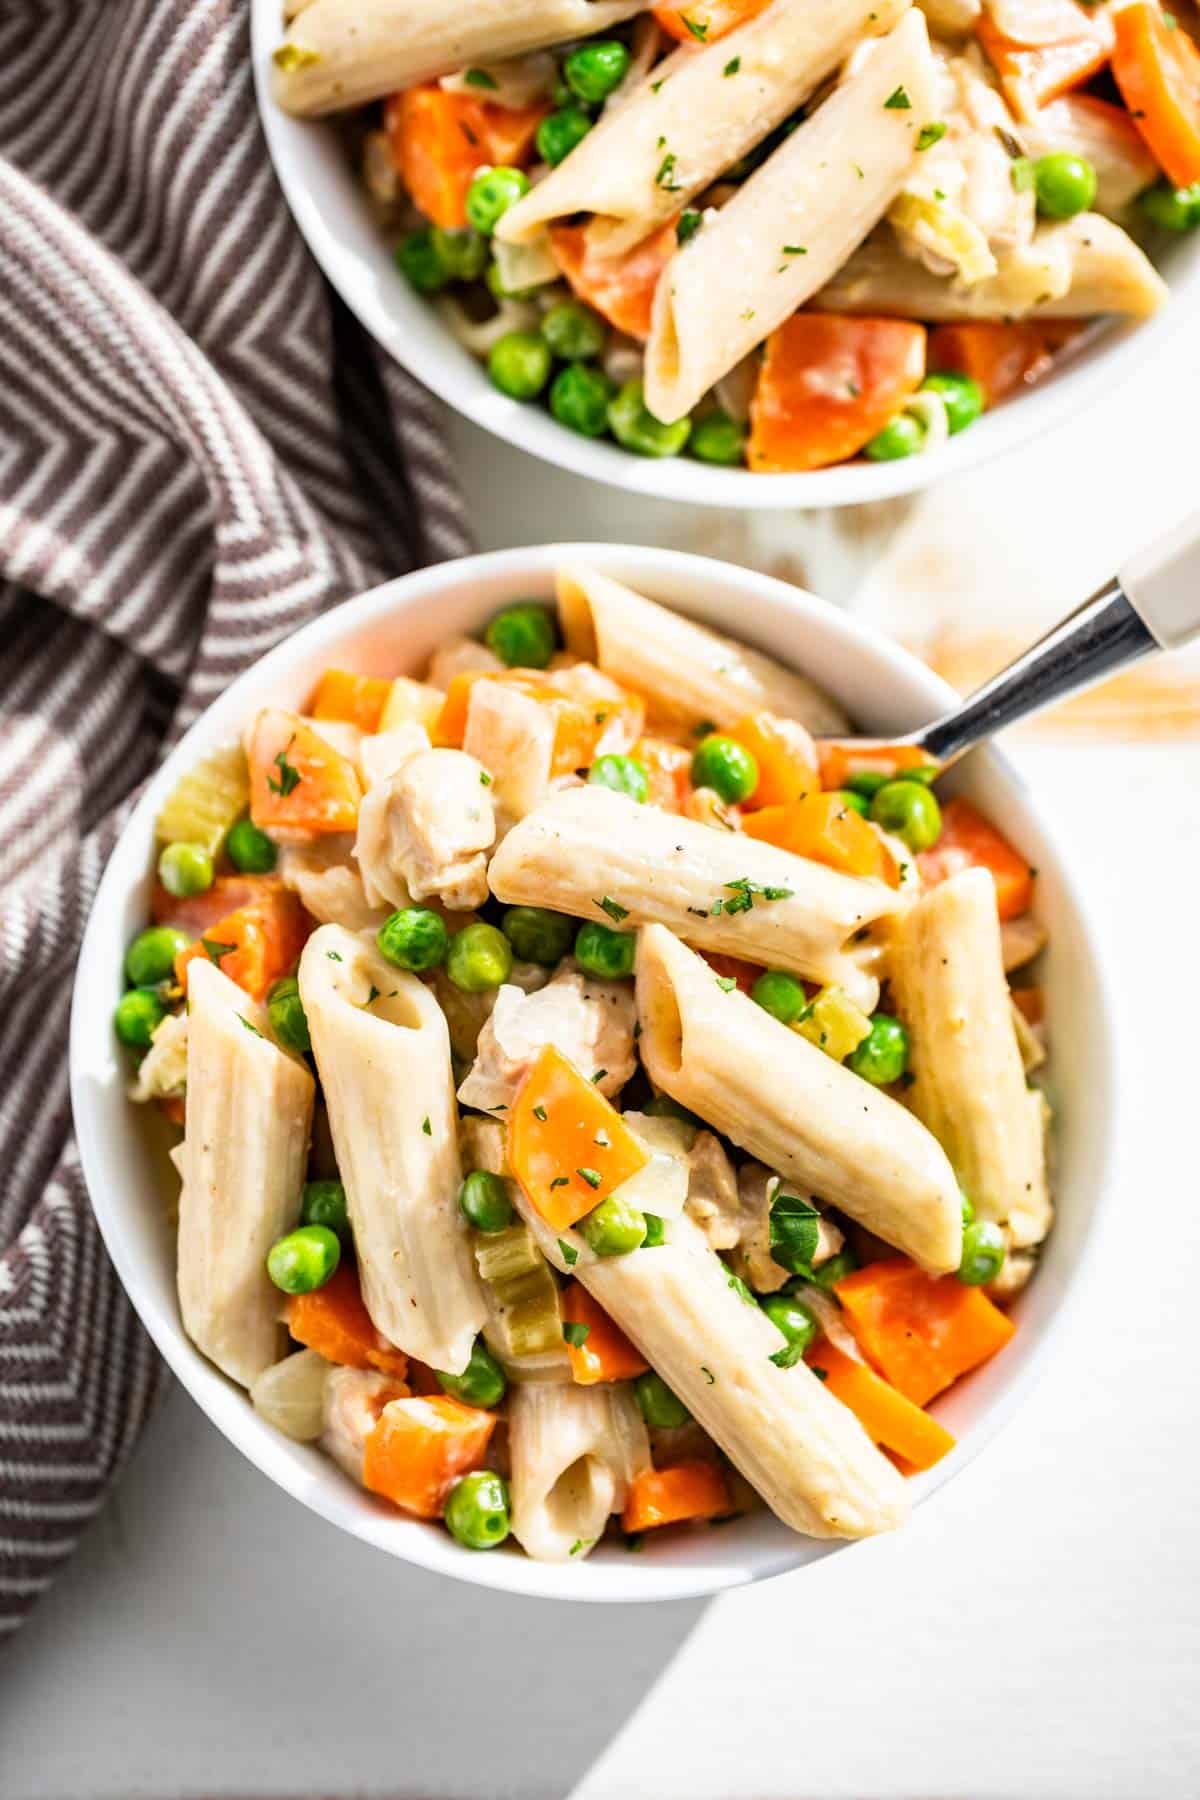 Two bowls of chicken pot pie pasta on a white background with a white handled fork in one bowl.